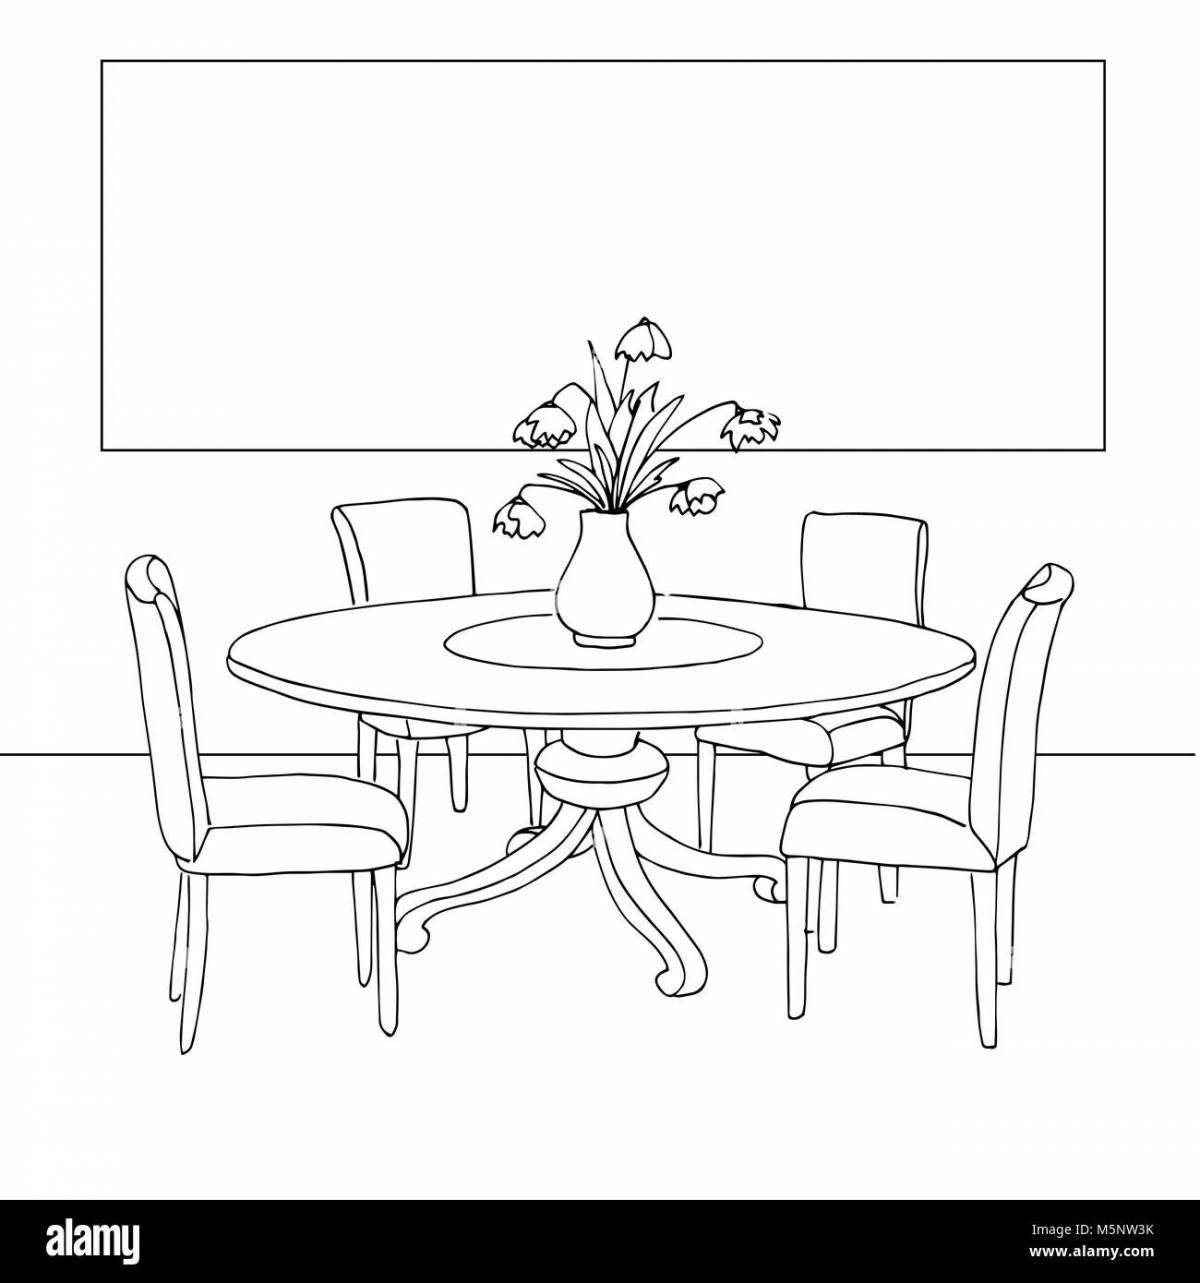 Playful canteen coloring page